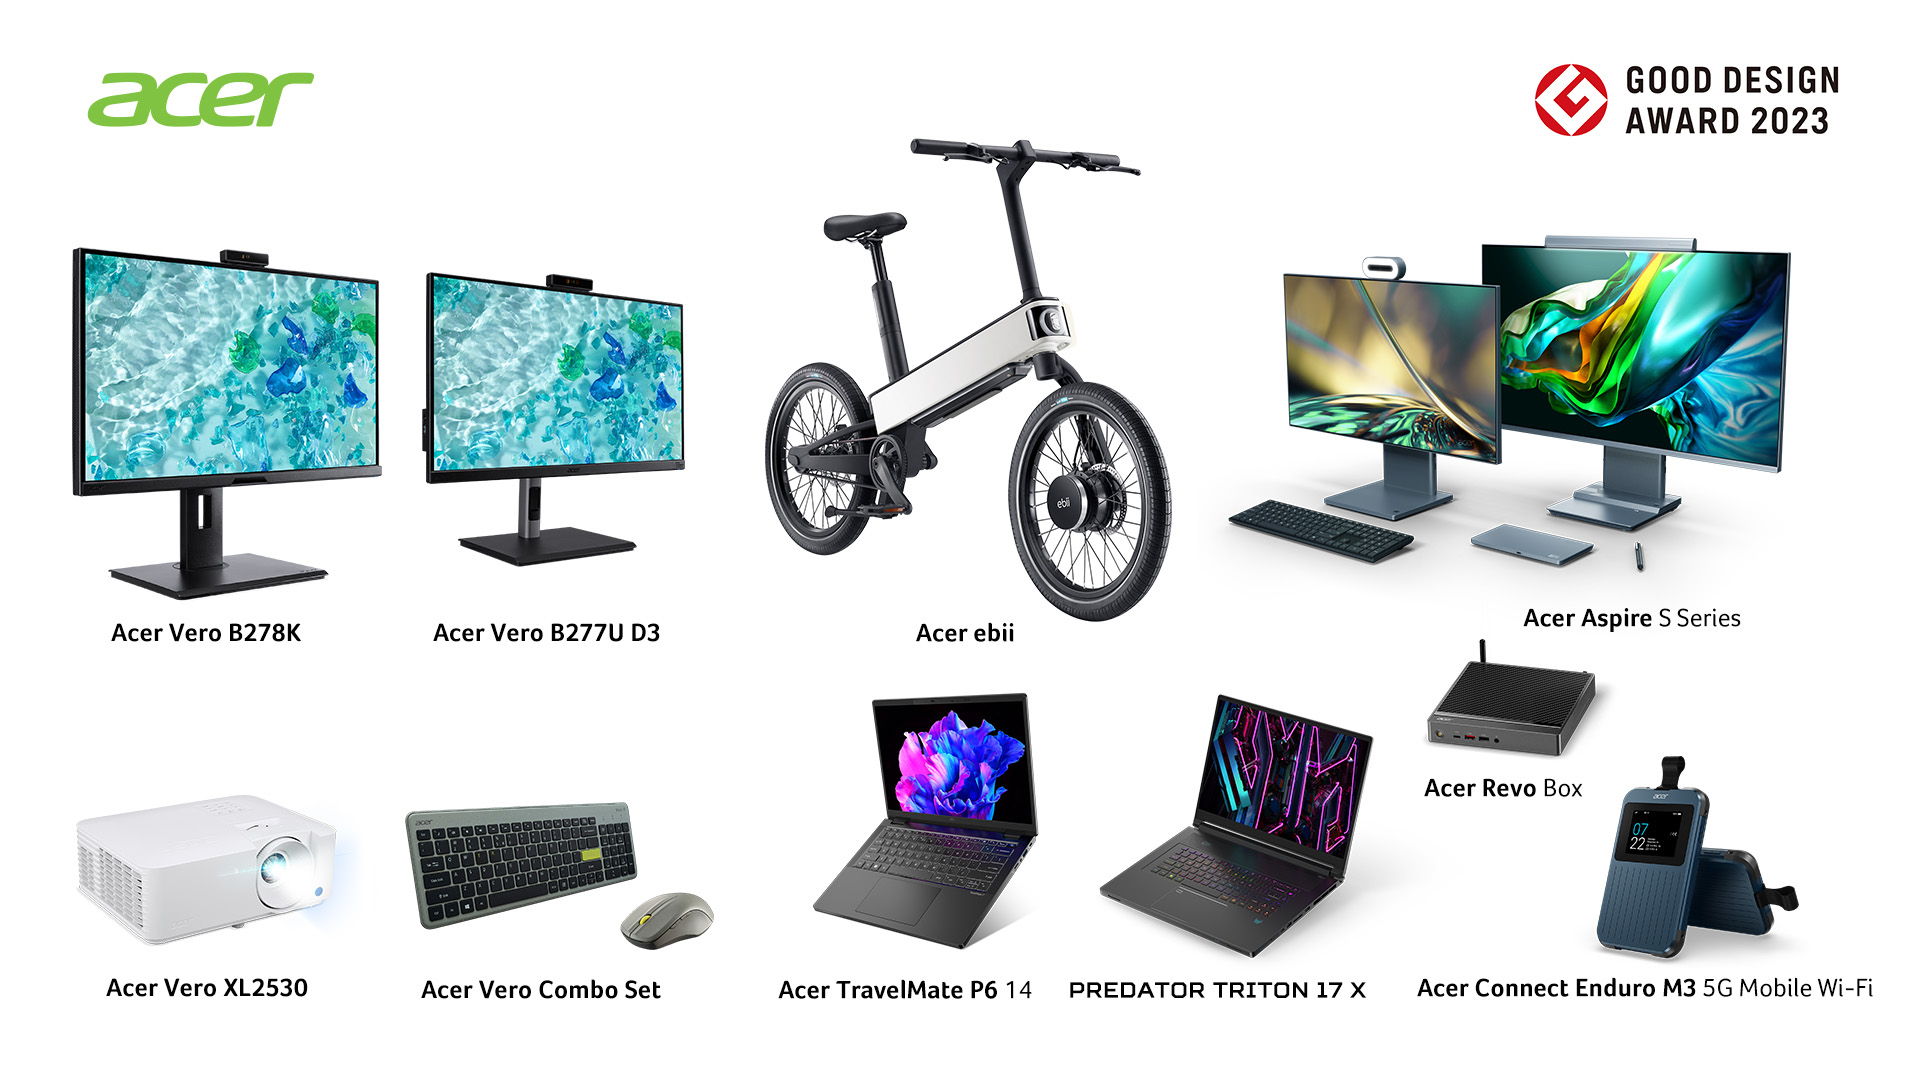 Acer’s ebii E-bike and Computer Products Honored in 2023 Good Design Awards